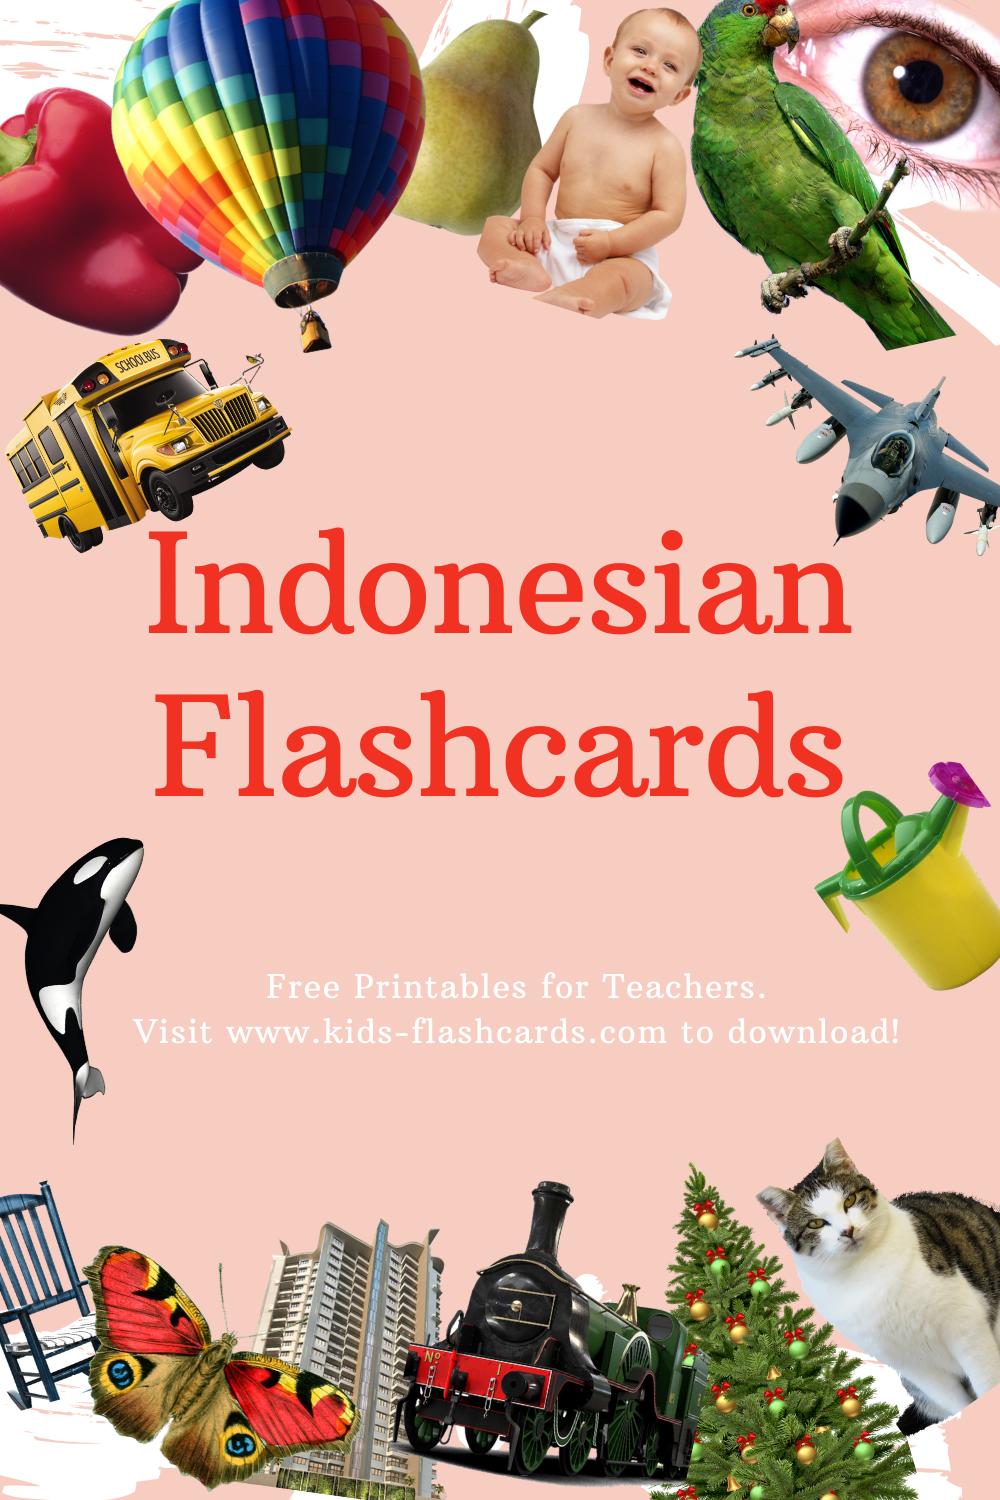 Worksheets to learn Indonesian language